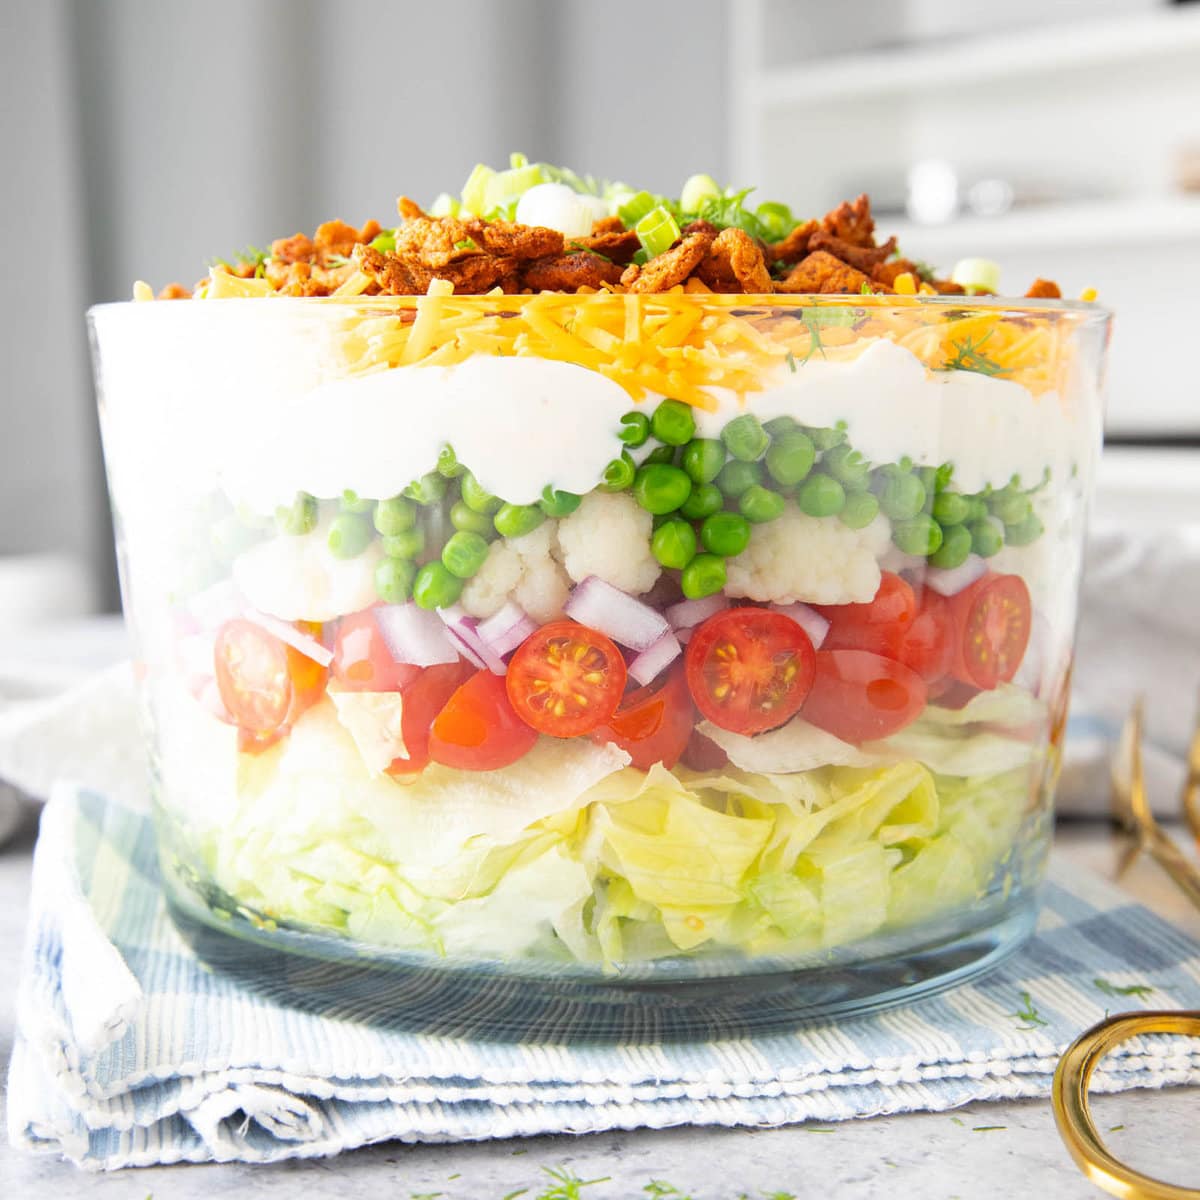 A 7 Layer Salad served in a glass bowl to showcase layers of lettuce, bacon, cheddar cheese, and salad dressing